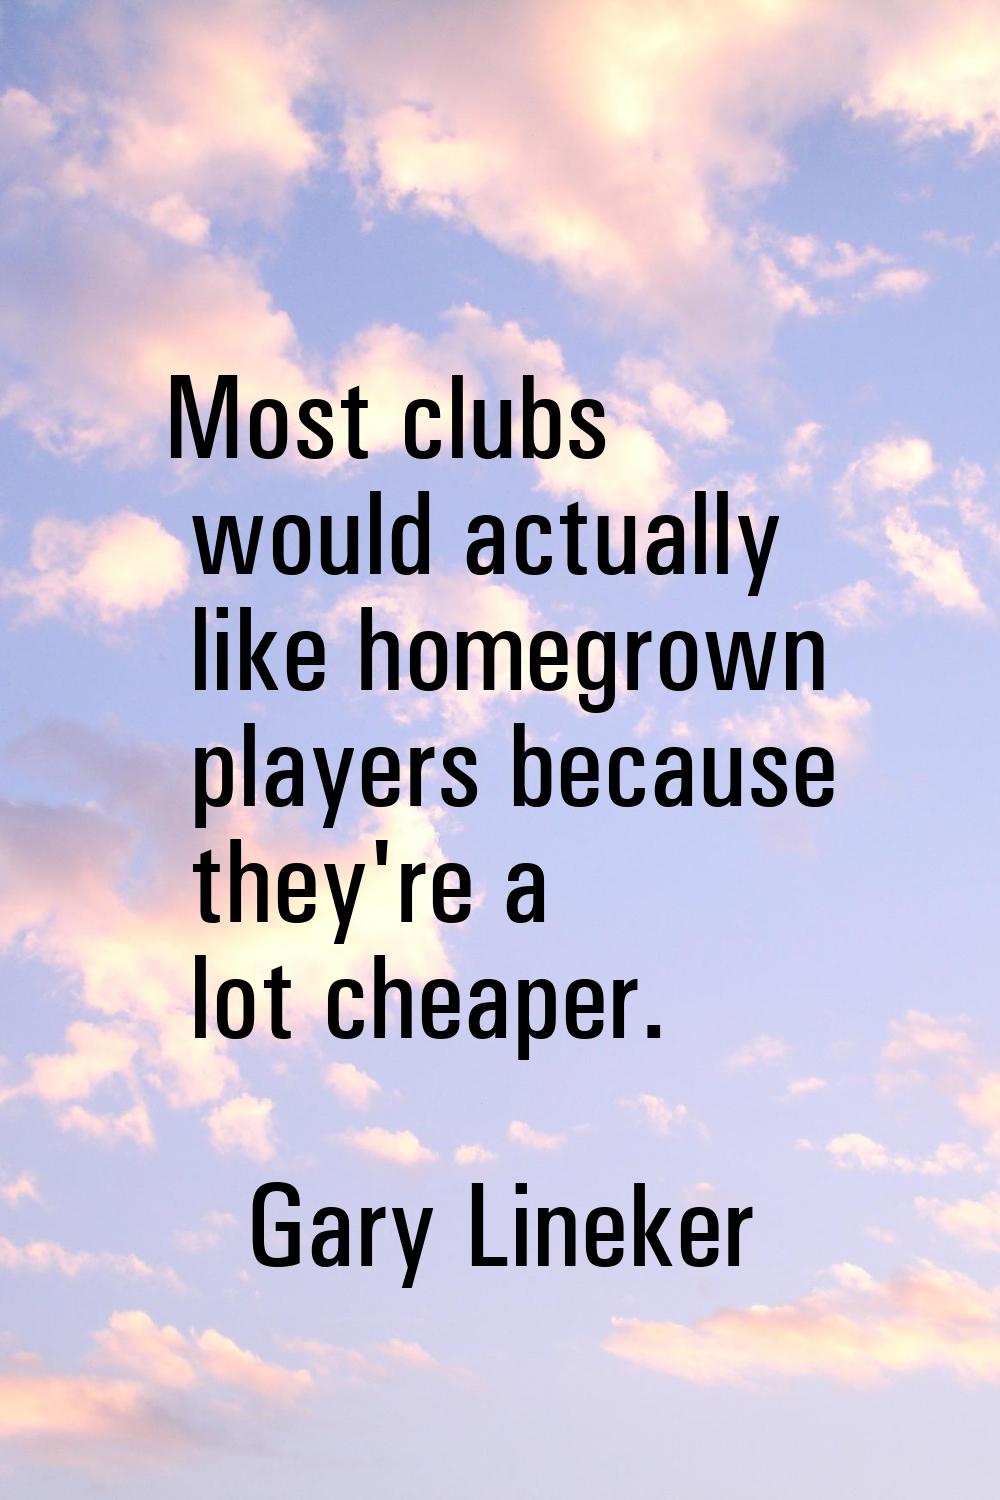 Most clubs would actually like homegrown players because they're a lot cheaper.